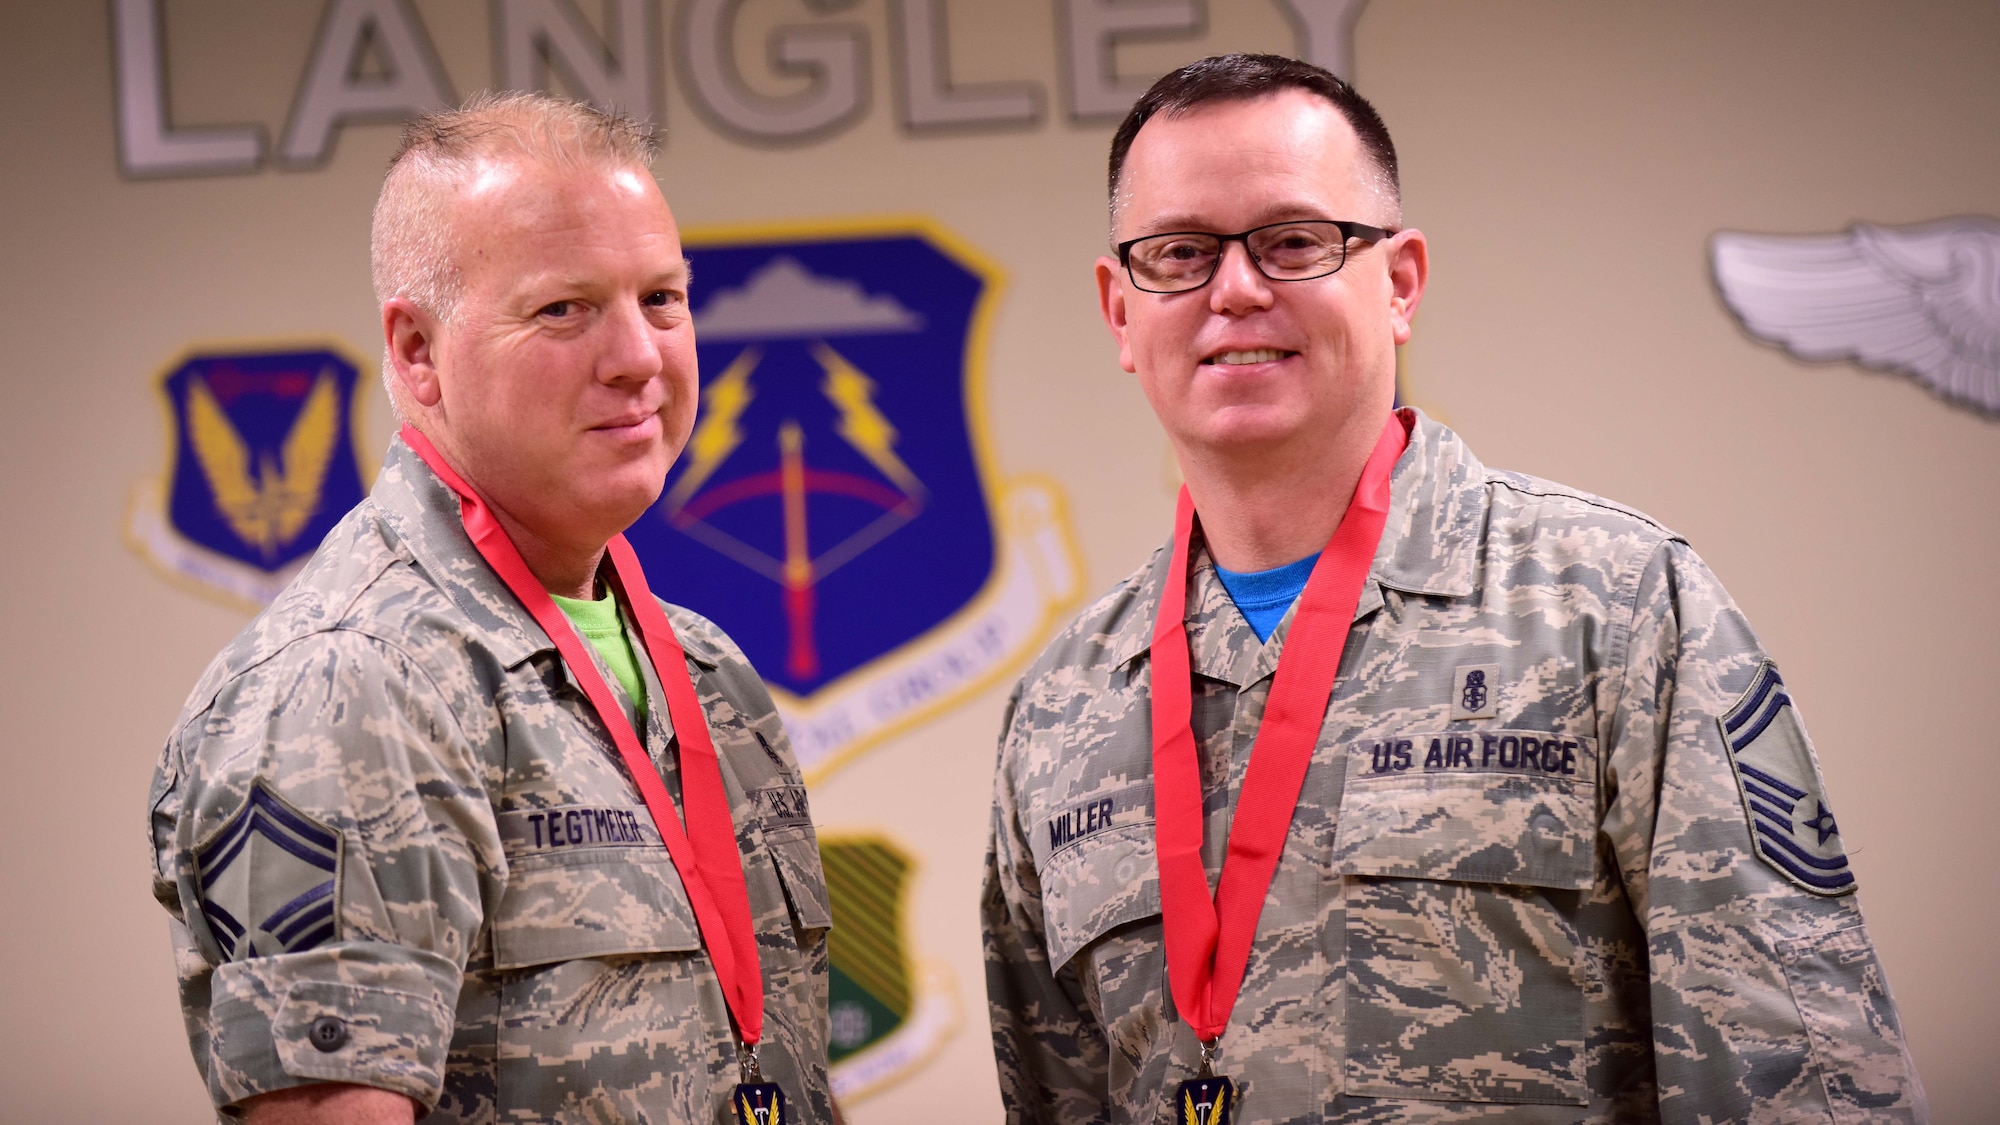 From left, U.S. Air Force Senior Master Sgt. Ellwood Tegtmeier, 633rd Inpatient Operations Squadron superintendent, was awarded the U.S. Air Force Senior NCO Clinical Support Excellence Award, while Senior Master Sgt. Curtis Miller, 633rd Medical Support Squadron superintendent, earned the U.S. Air Force Organizational Management Excellence Award, at Joint Base, Langley-Eustis, Va., Feb. 15, 2017. In addition to their job performance, both Miller and Tegtmeier were judged on their ability to develop their people, self-improvement and their work within the local community and base populace. (U.S. Air Force photo by Senior Airman Areca T. Bell) 